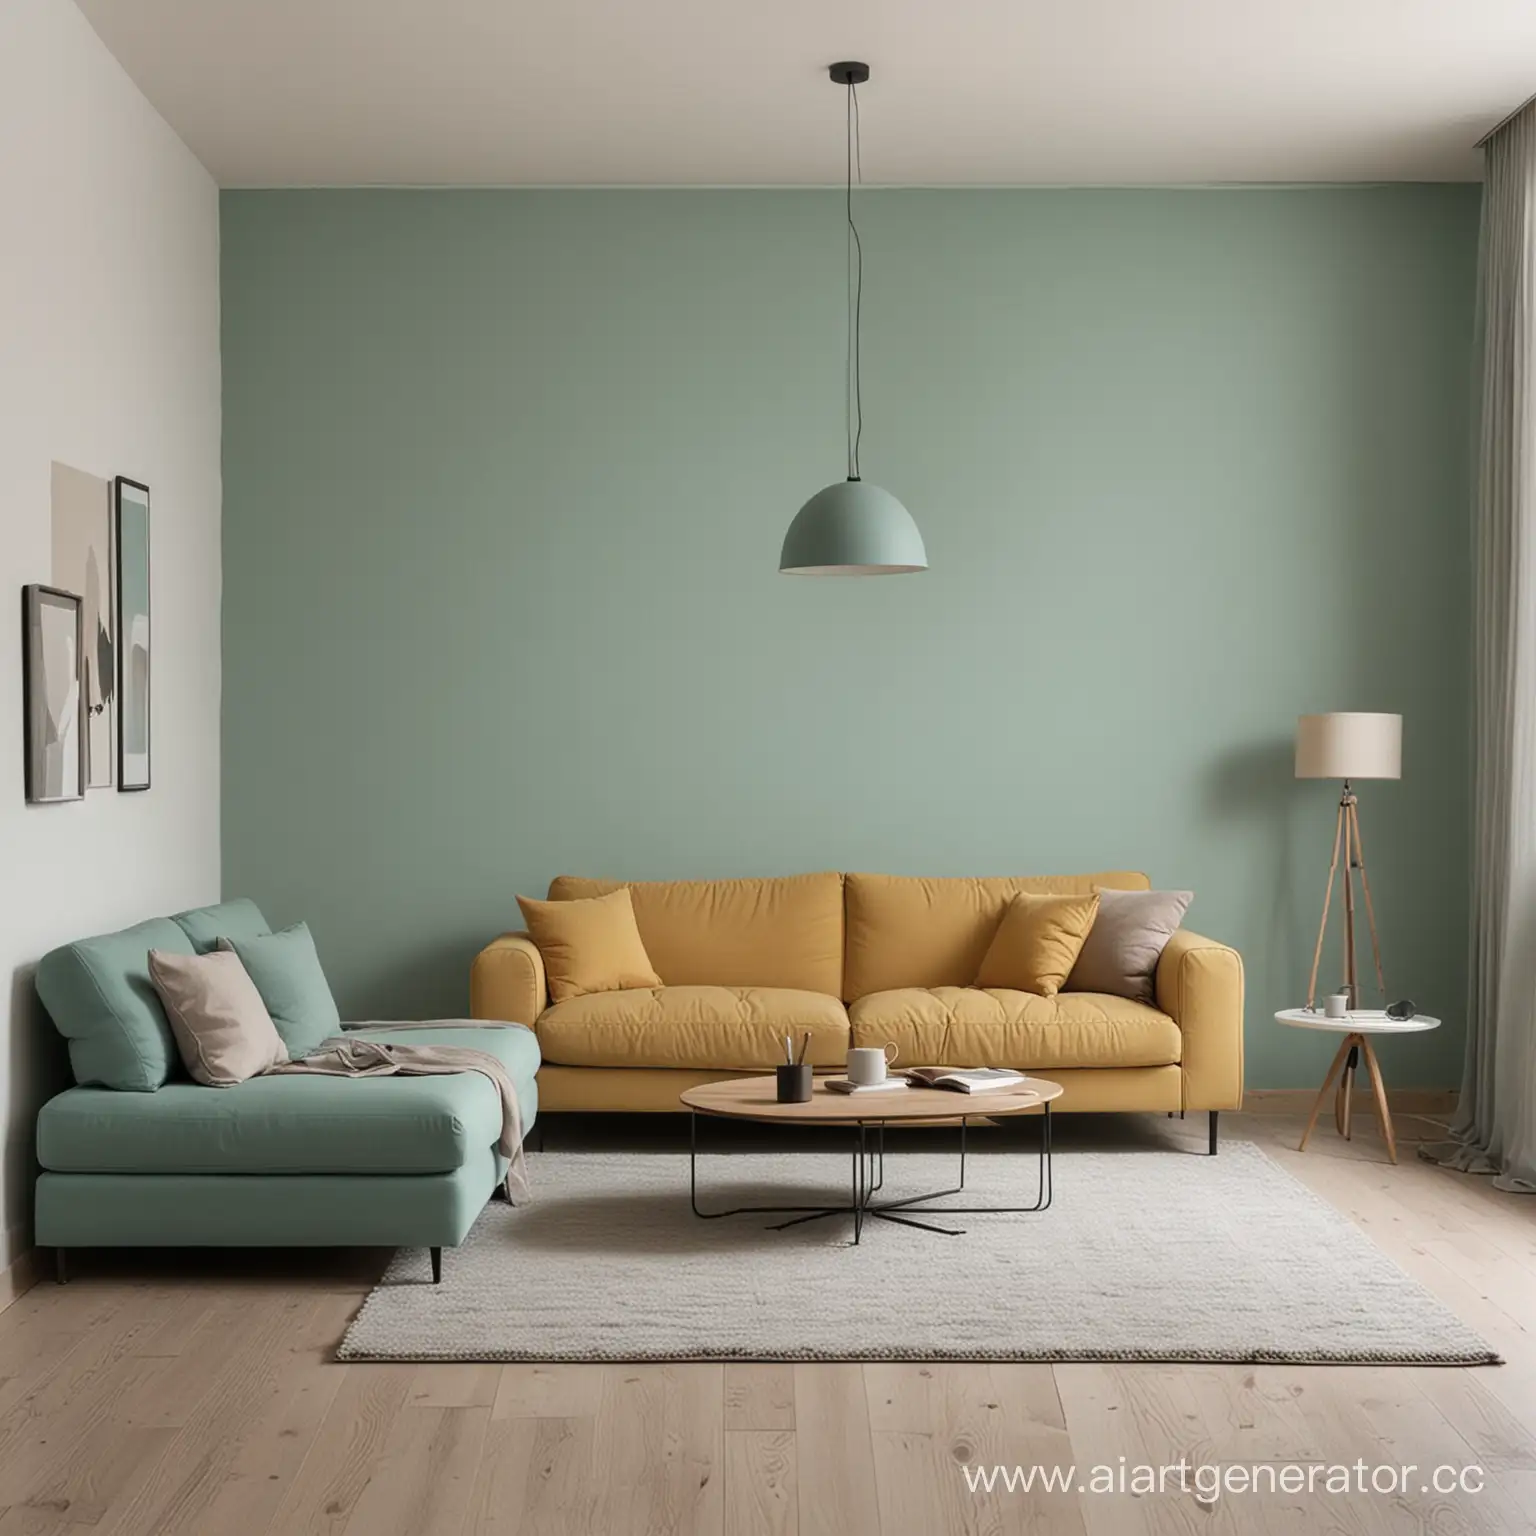 Cozy-Family-Gathering-in-MutedColored-Living-Room